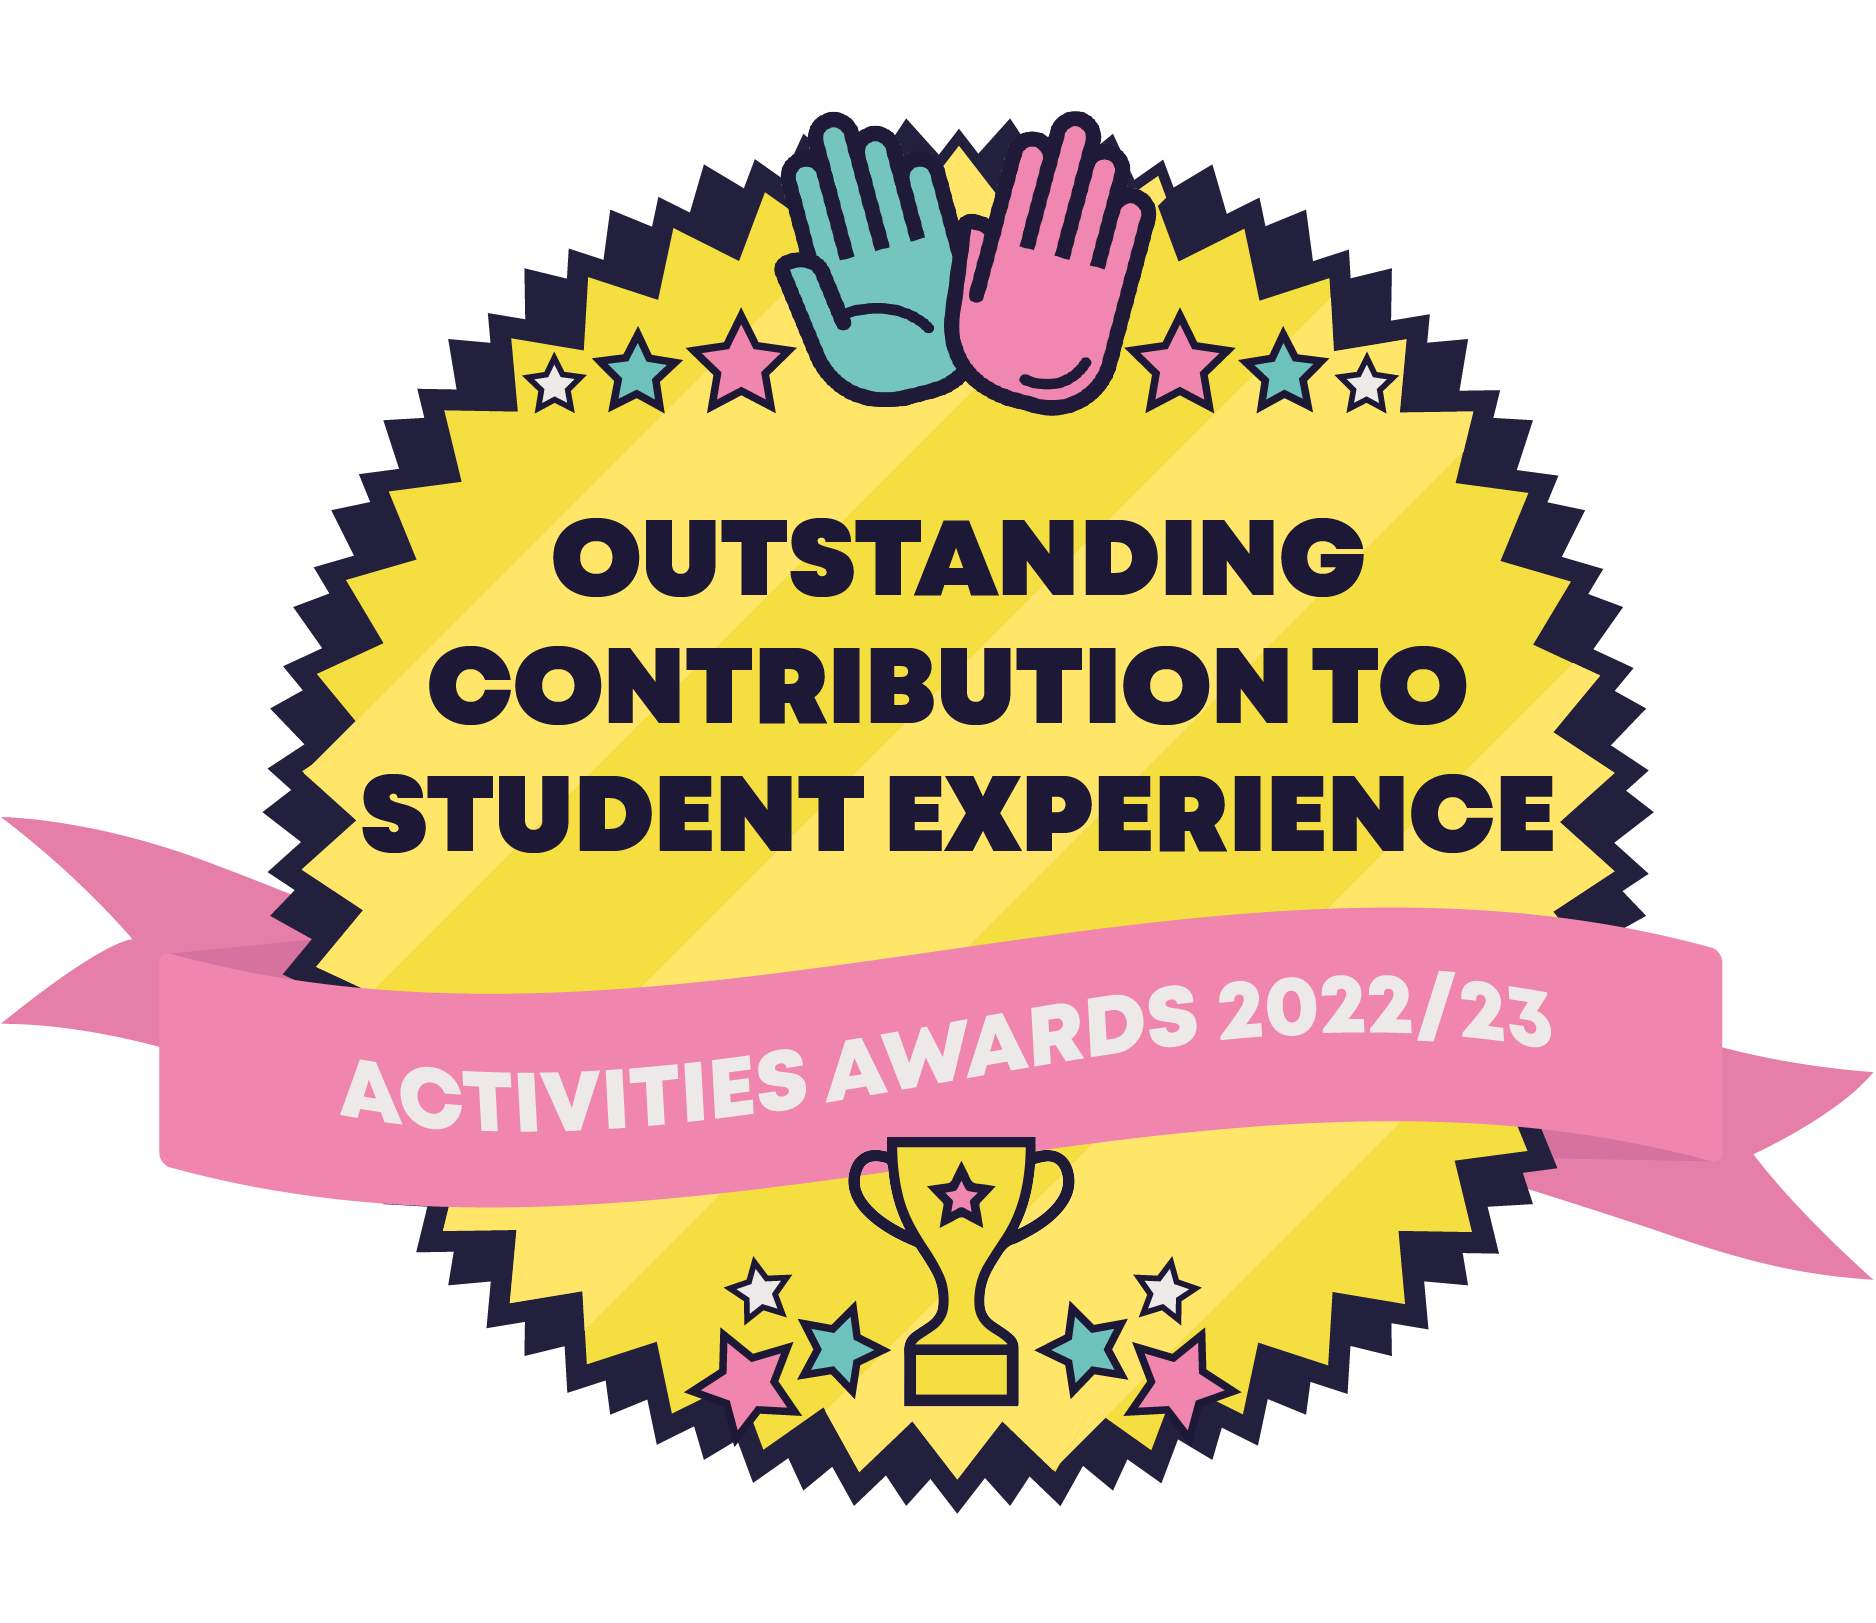 Outstanding Contribution to Student Experience